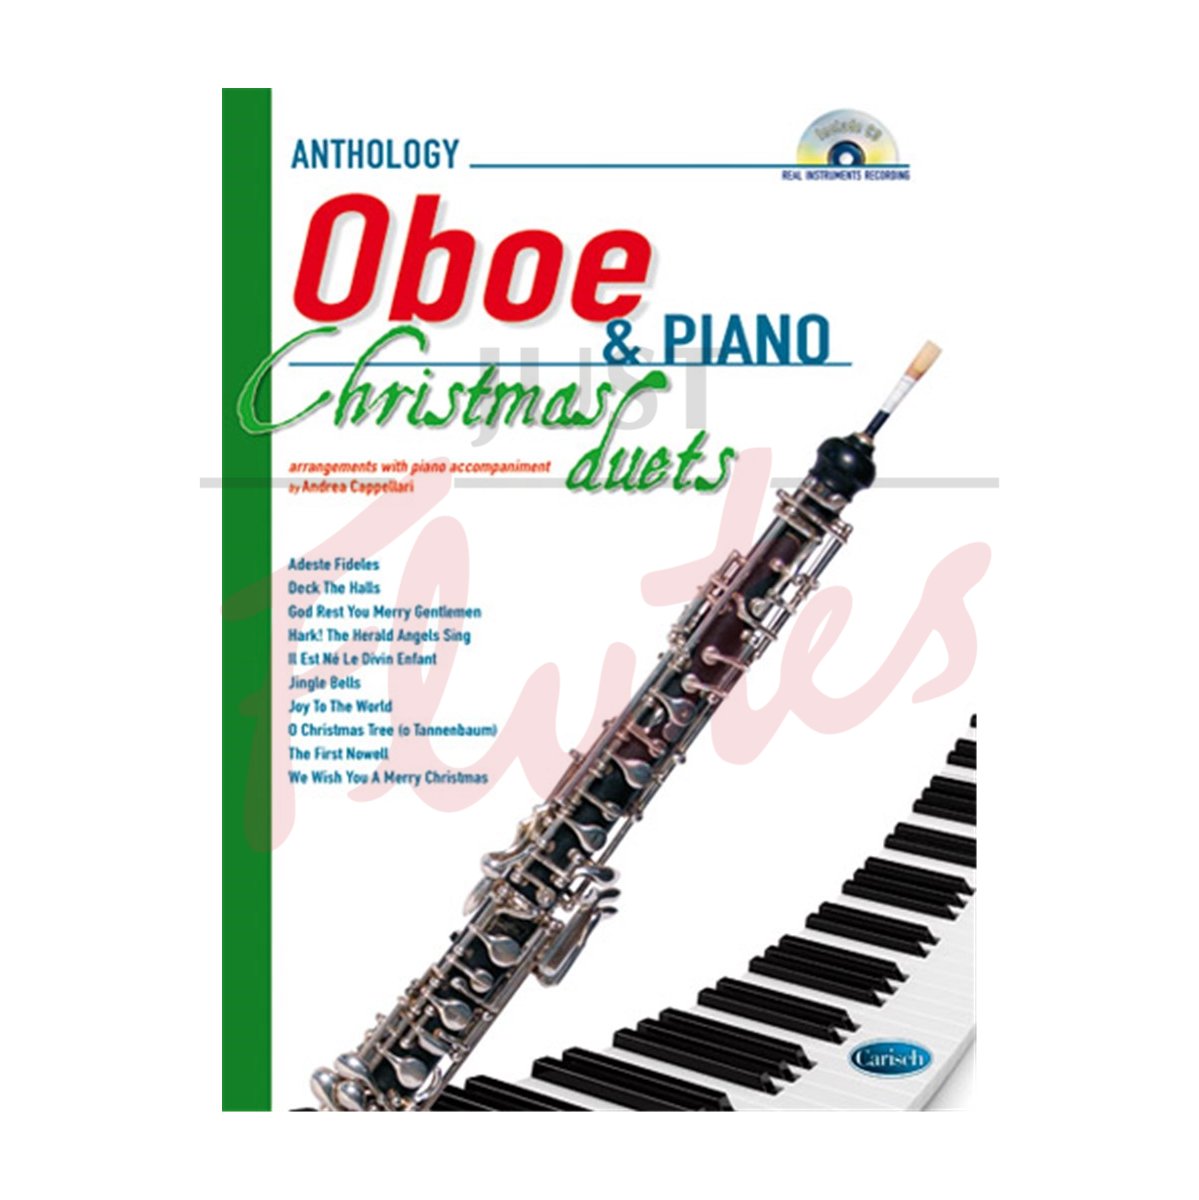 Anthology Christmas Duets for Oboe and Piano